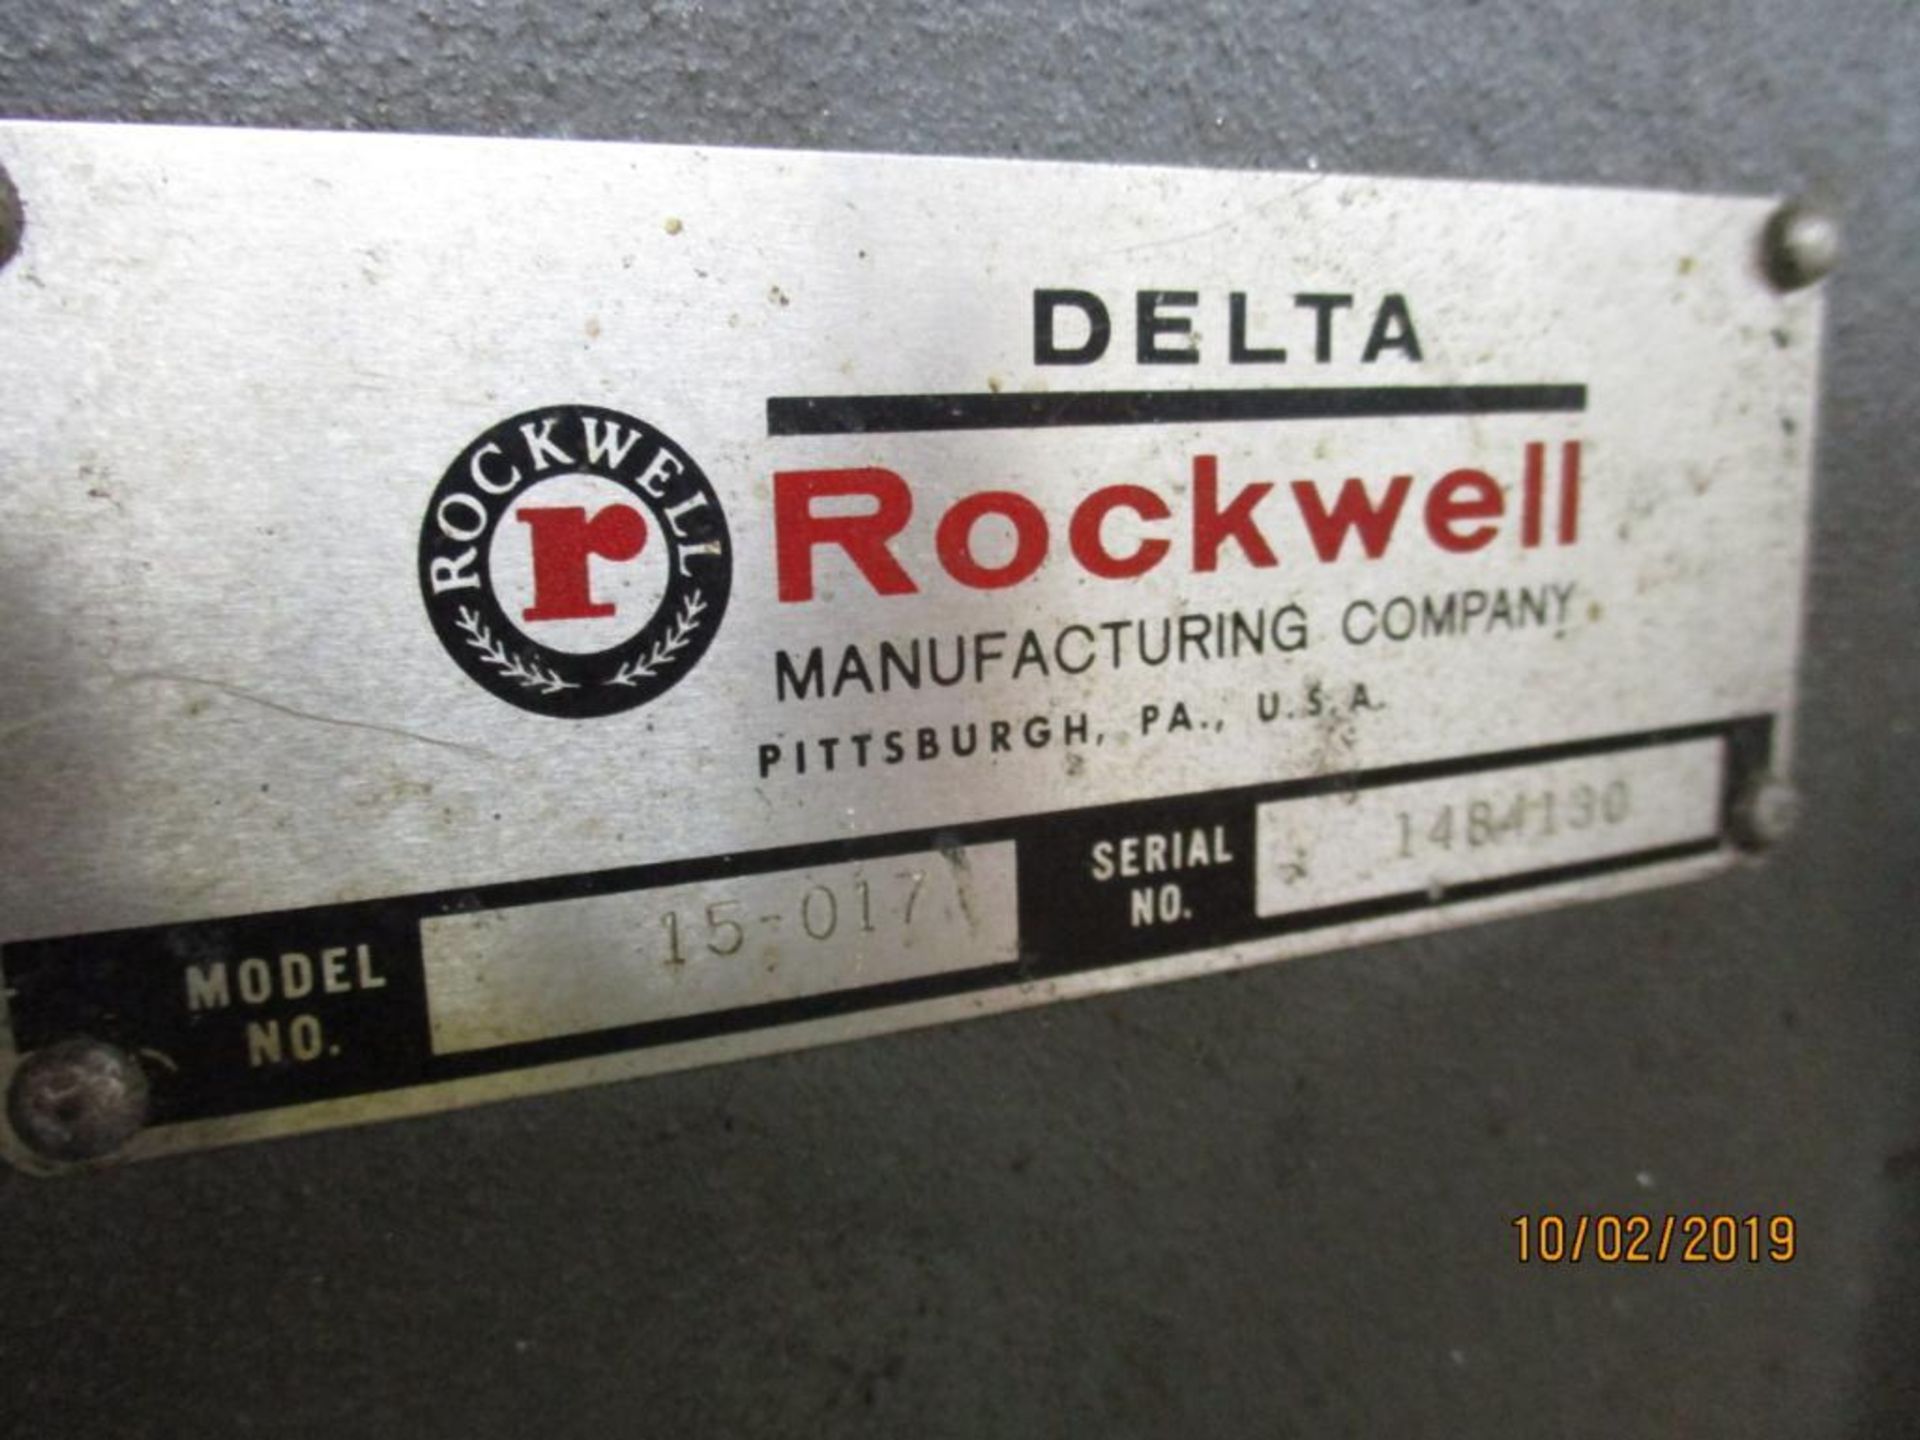 Delta Rockwell 15" 15-017 Table Top Drill Press S/N 1484130 - Image 3 of 4